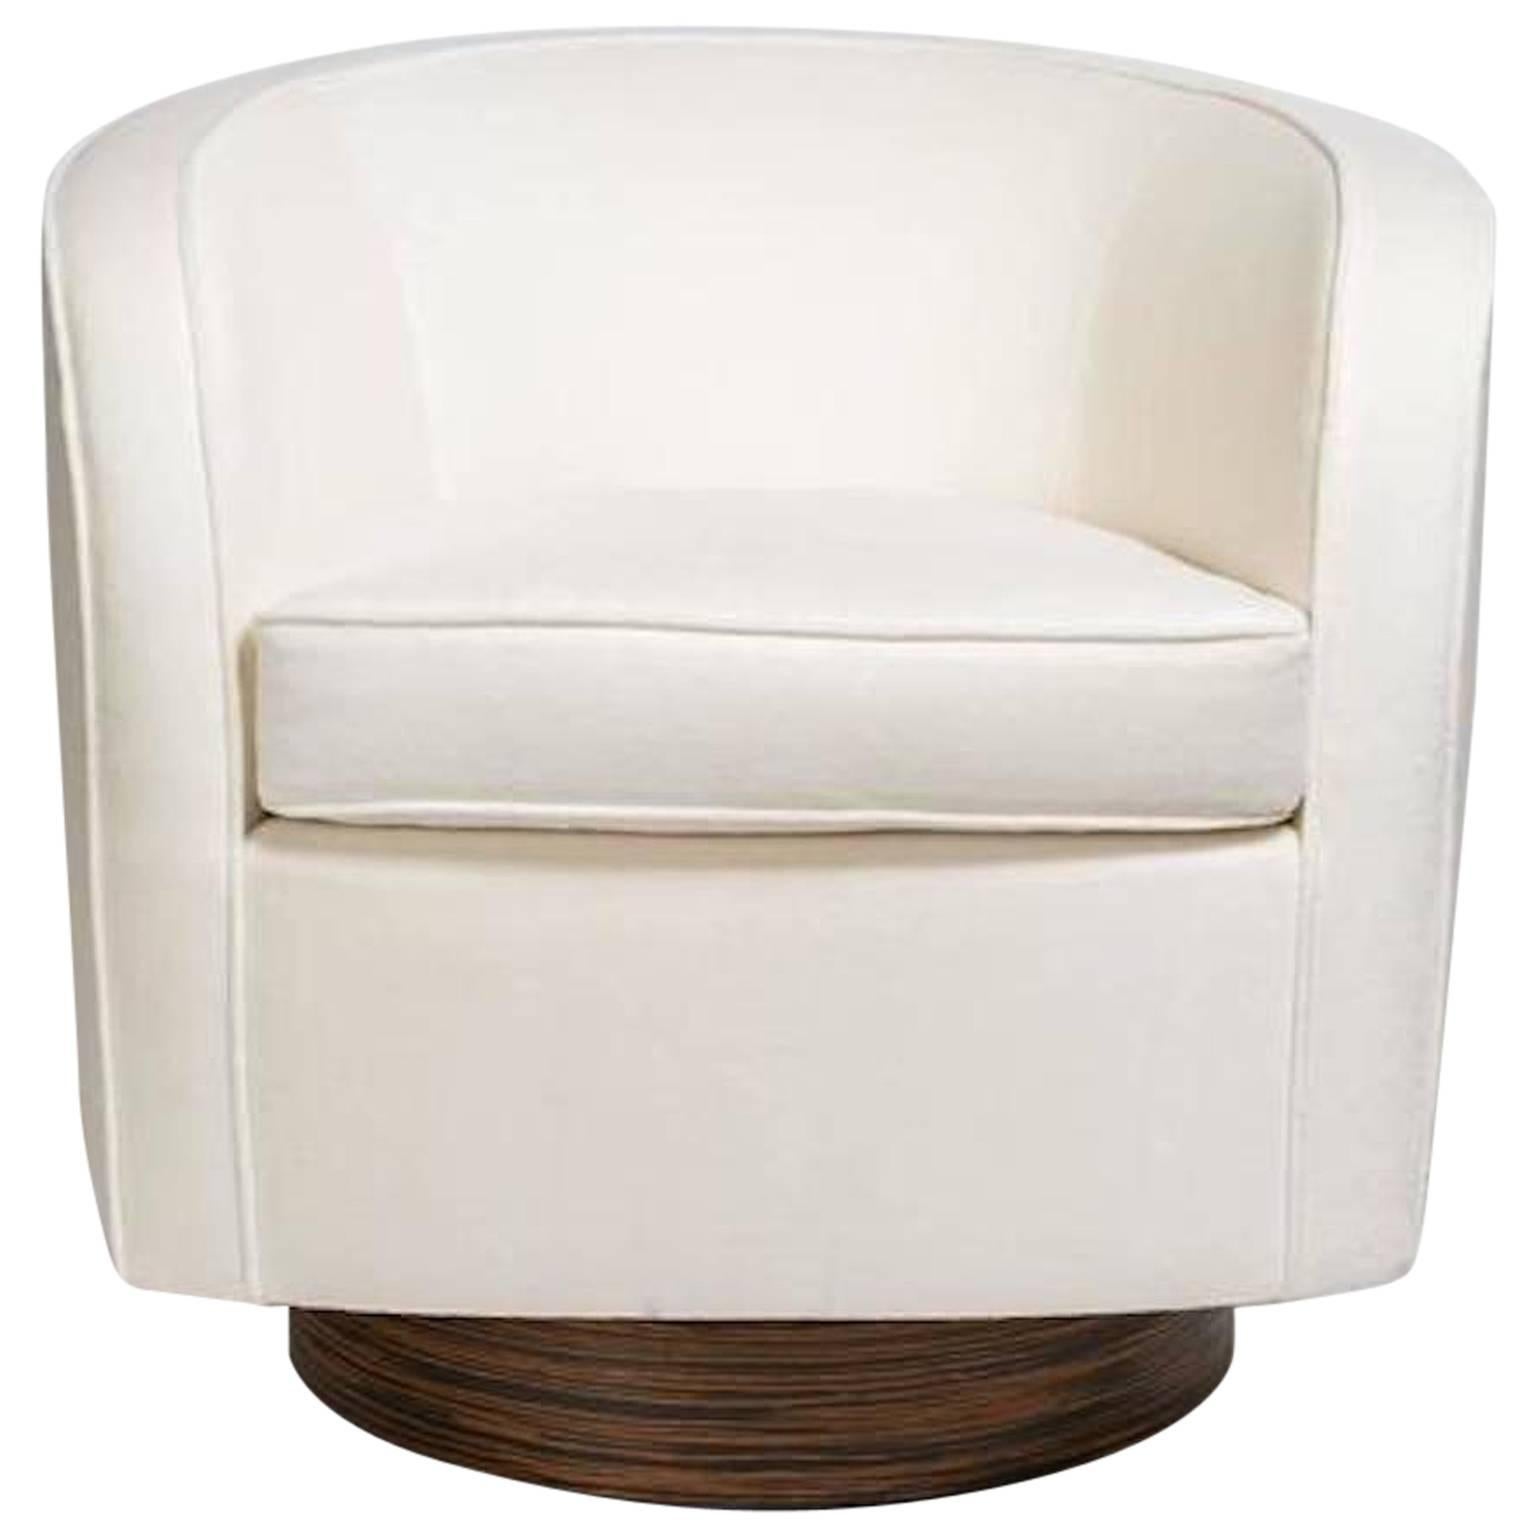 Mid-Century Modern chair with streamline barrel back design. Shown in luxurious ivory velvet fabric with self welt details. This exact fabric may not be available but we can provide a similar fabric or use customer's own fabric (COM) at no